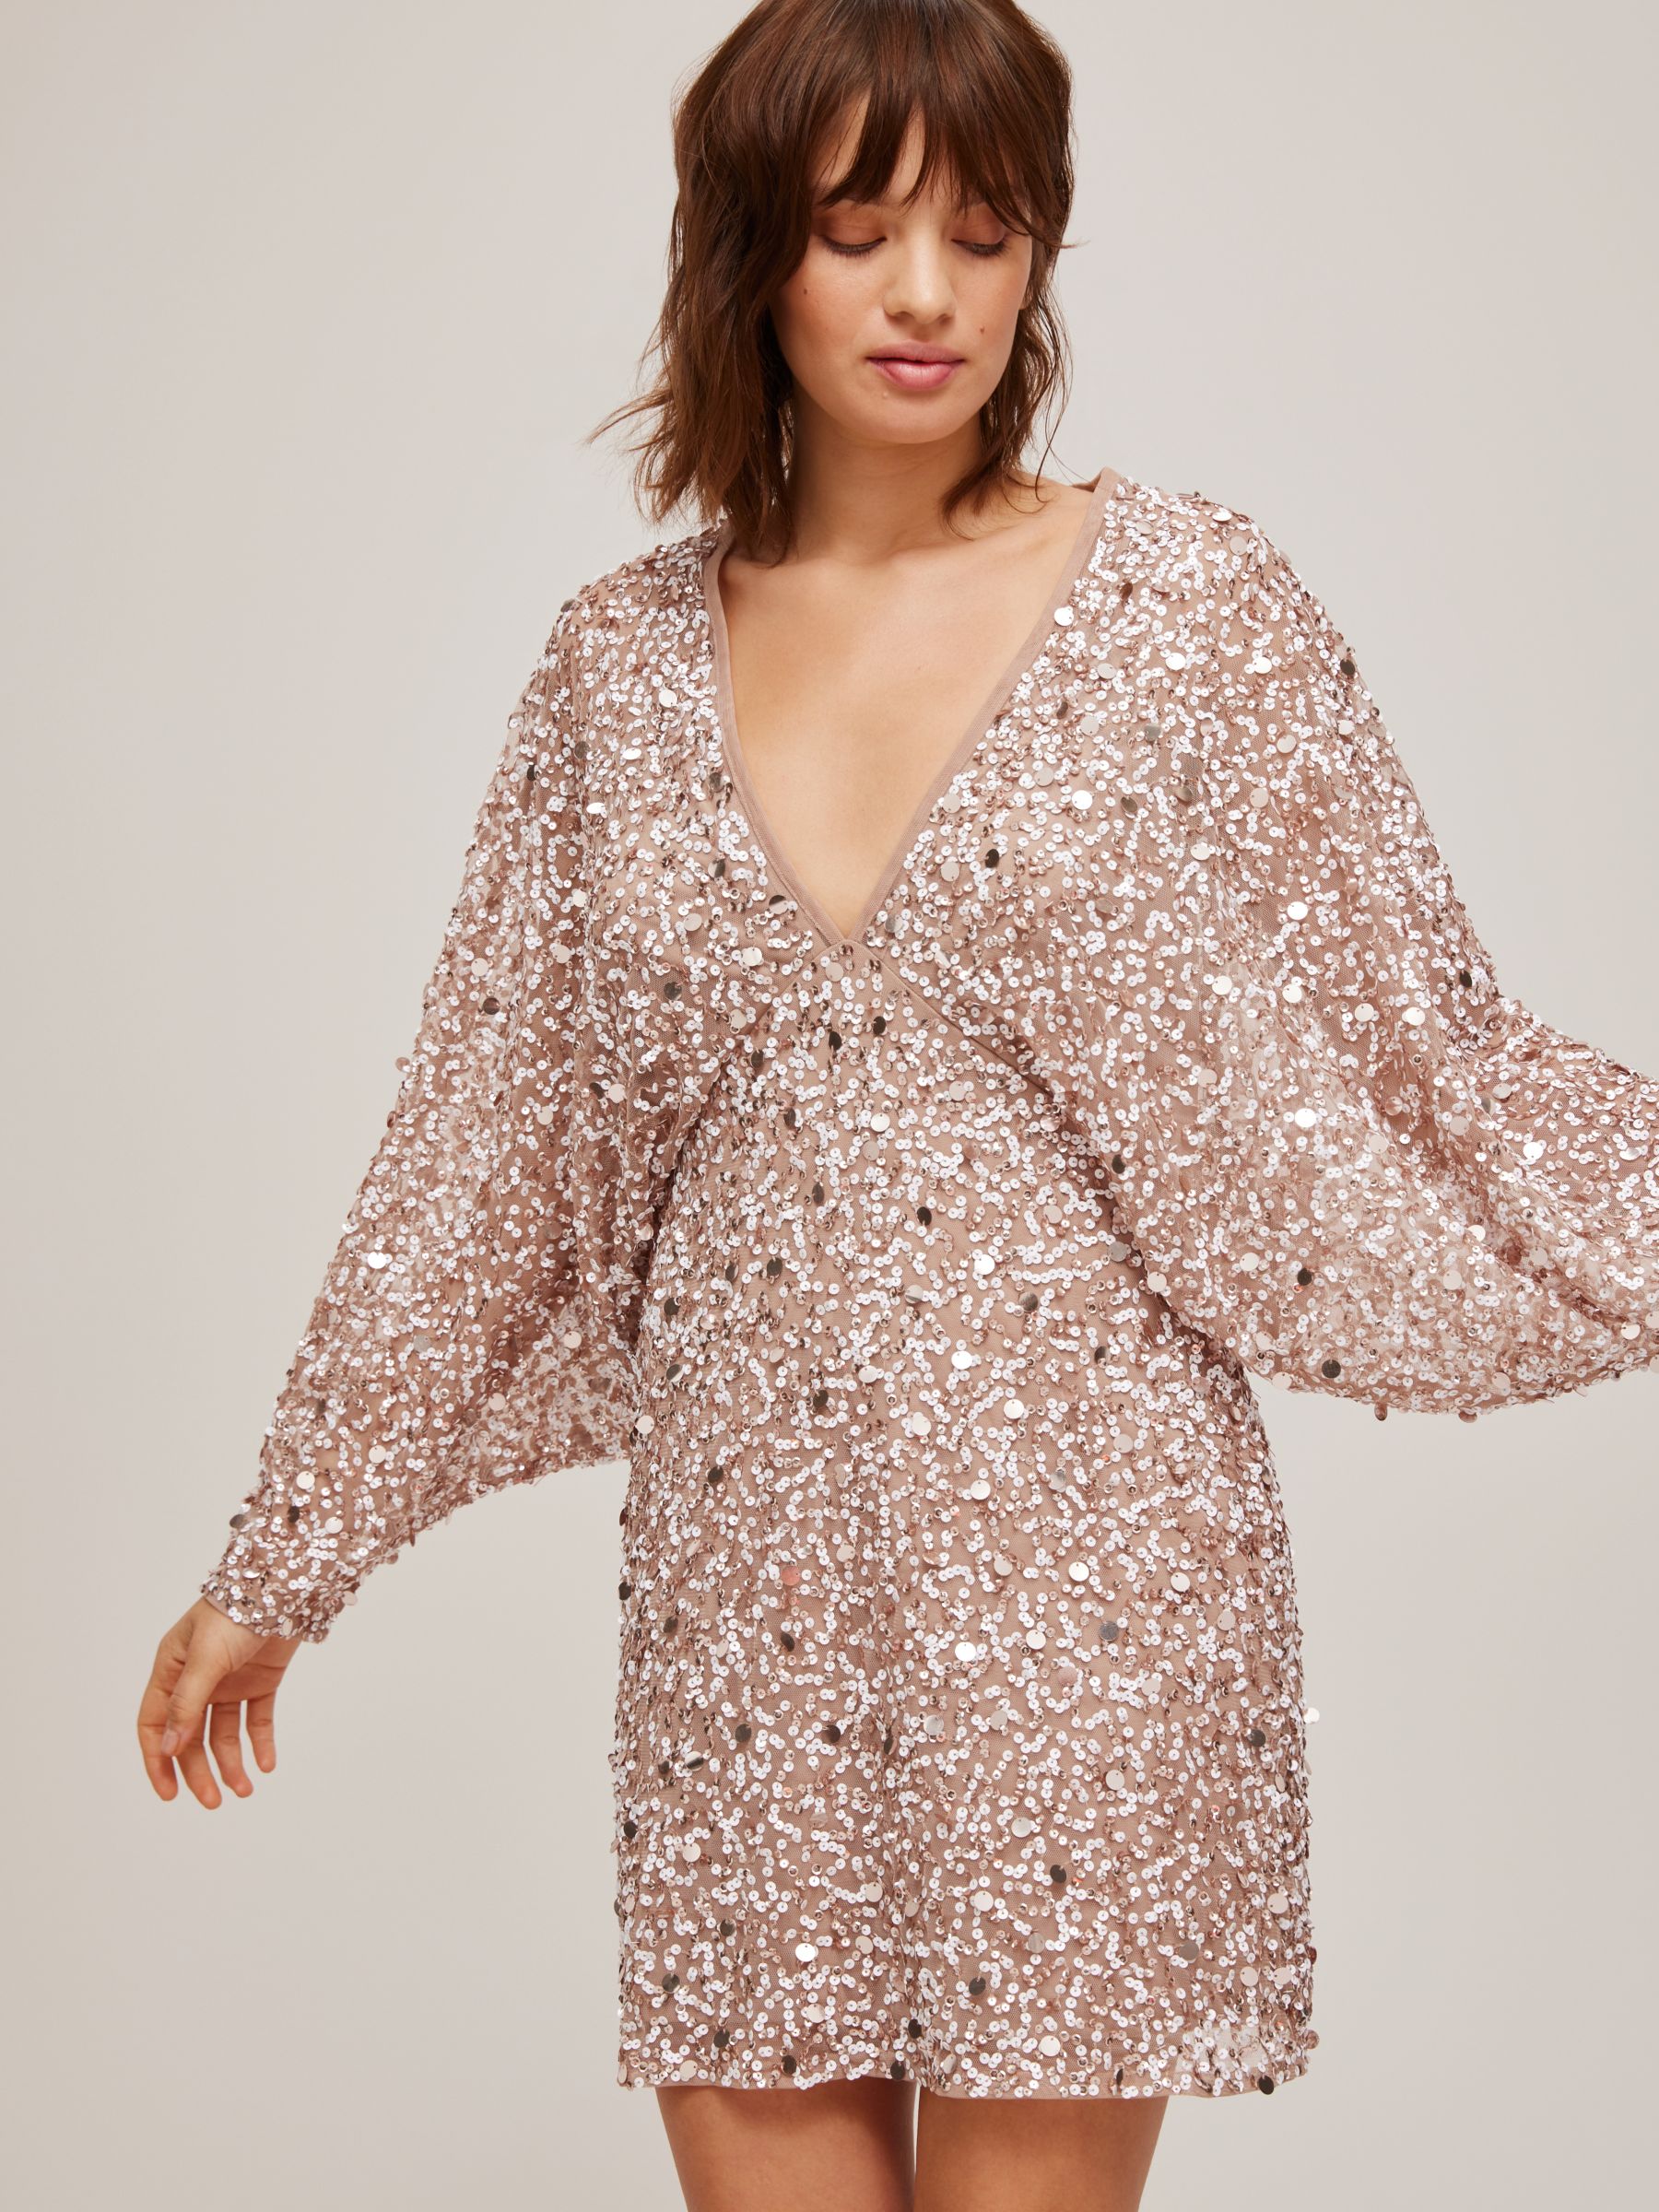 Buy Lace & Beads Astra Sequined Mini Dress, Blush Online at johnlewis.com